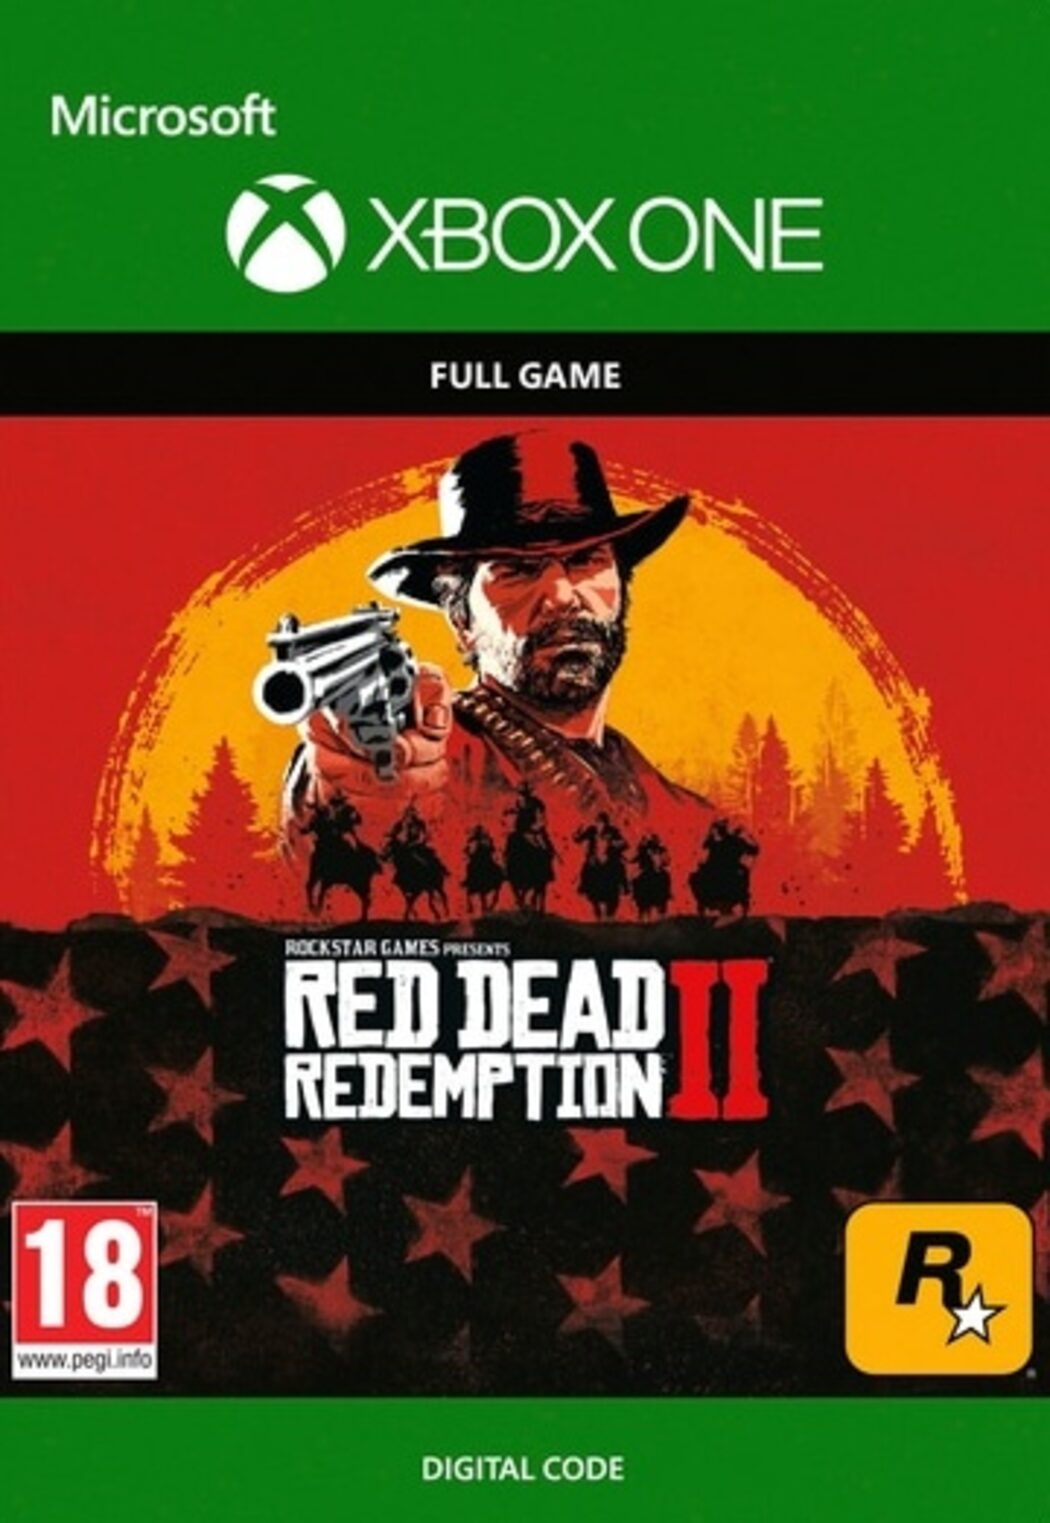 Buy Red Dead Redemption 2 Today! Cheap Key! | ENEBA